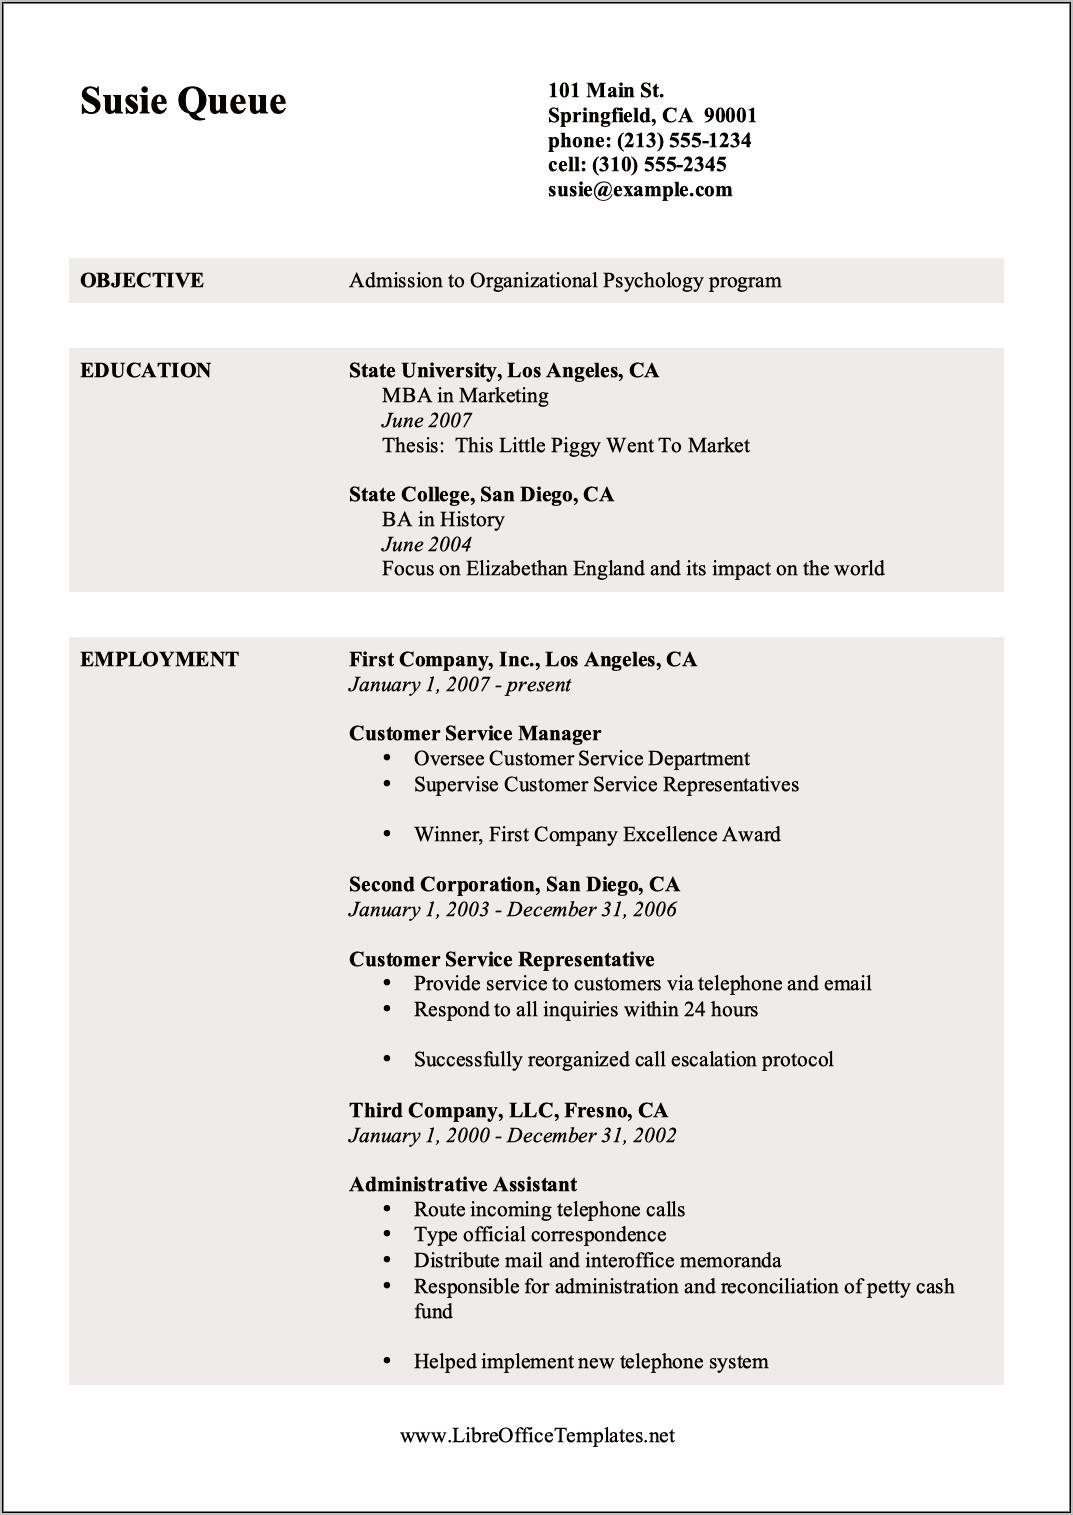 Free Resume Templates For Libreoffice